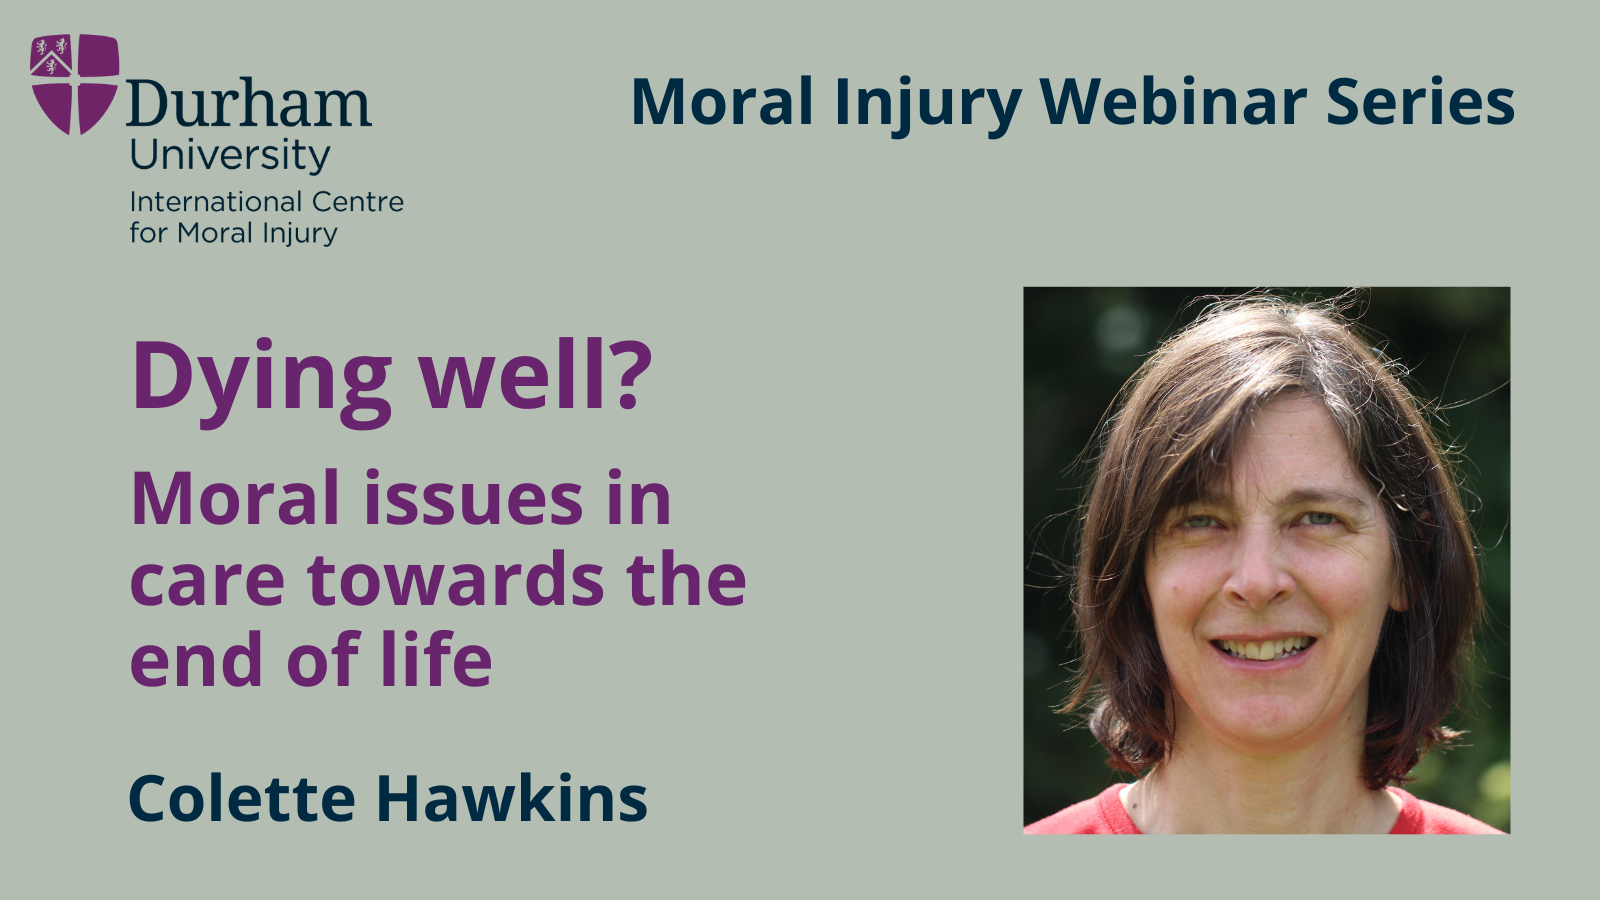 Moral issues in care towards the end of life - a presentation by Dr Colette Hawkins